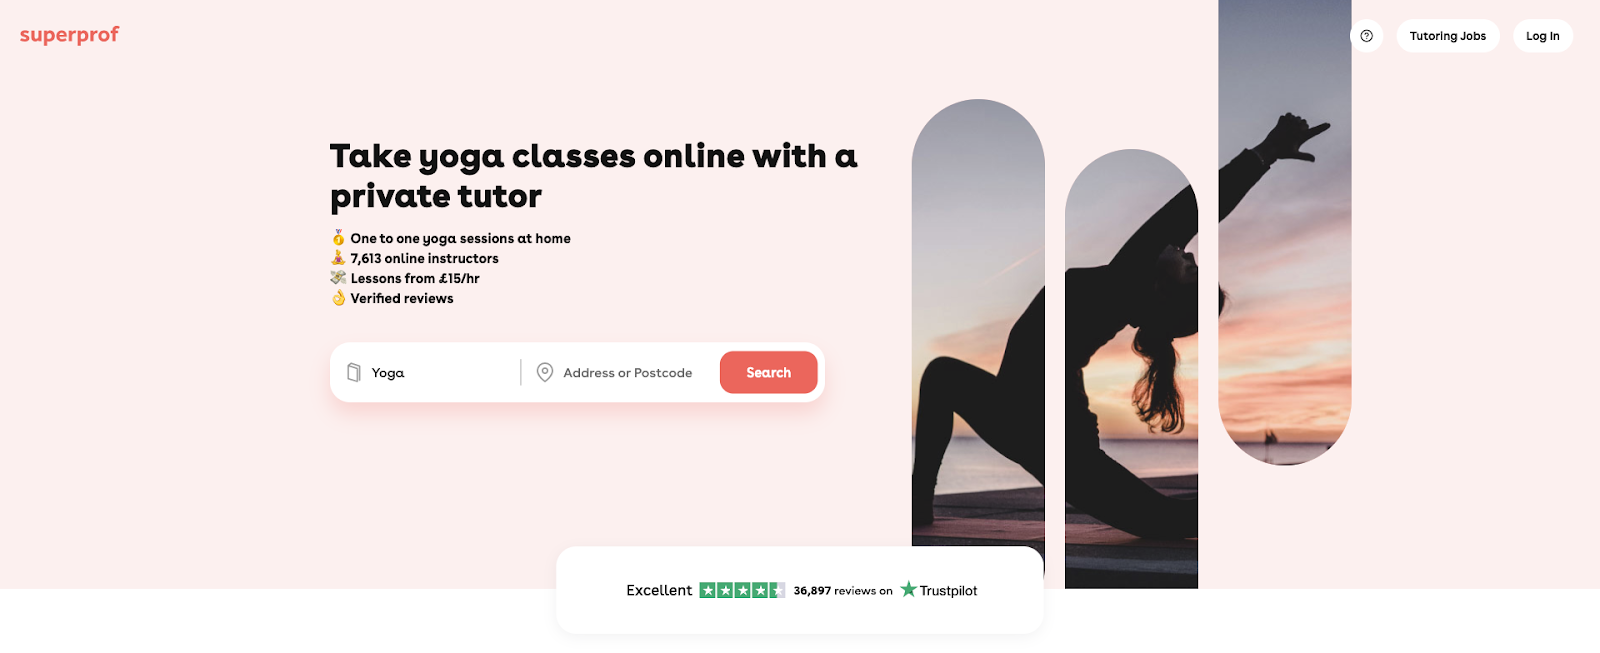 "superprof" landing page with "Take yoga classes online with a private tutor" title